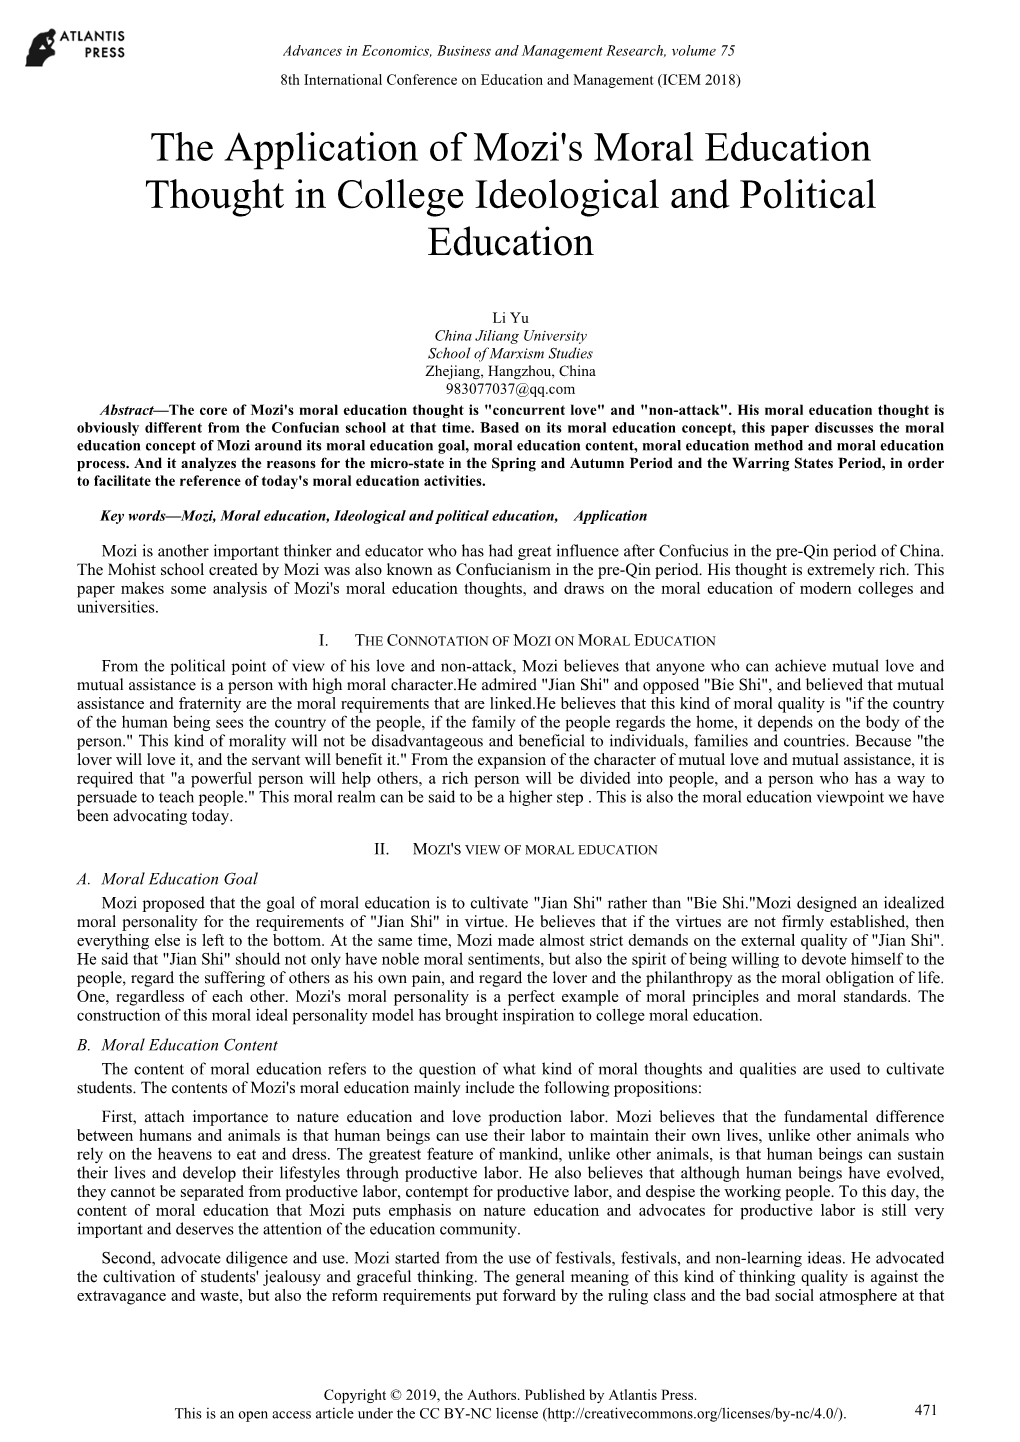 The Application of Mozi's Moral Education Thought in College Ideological and Political Education